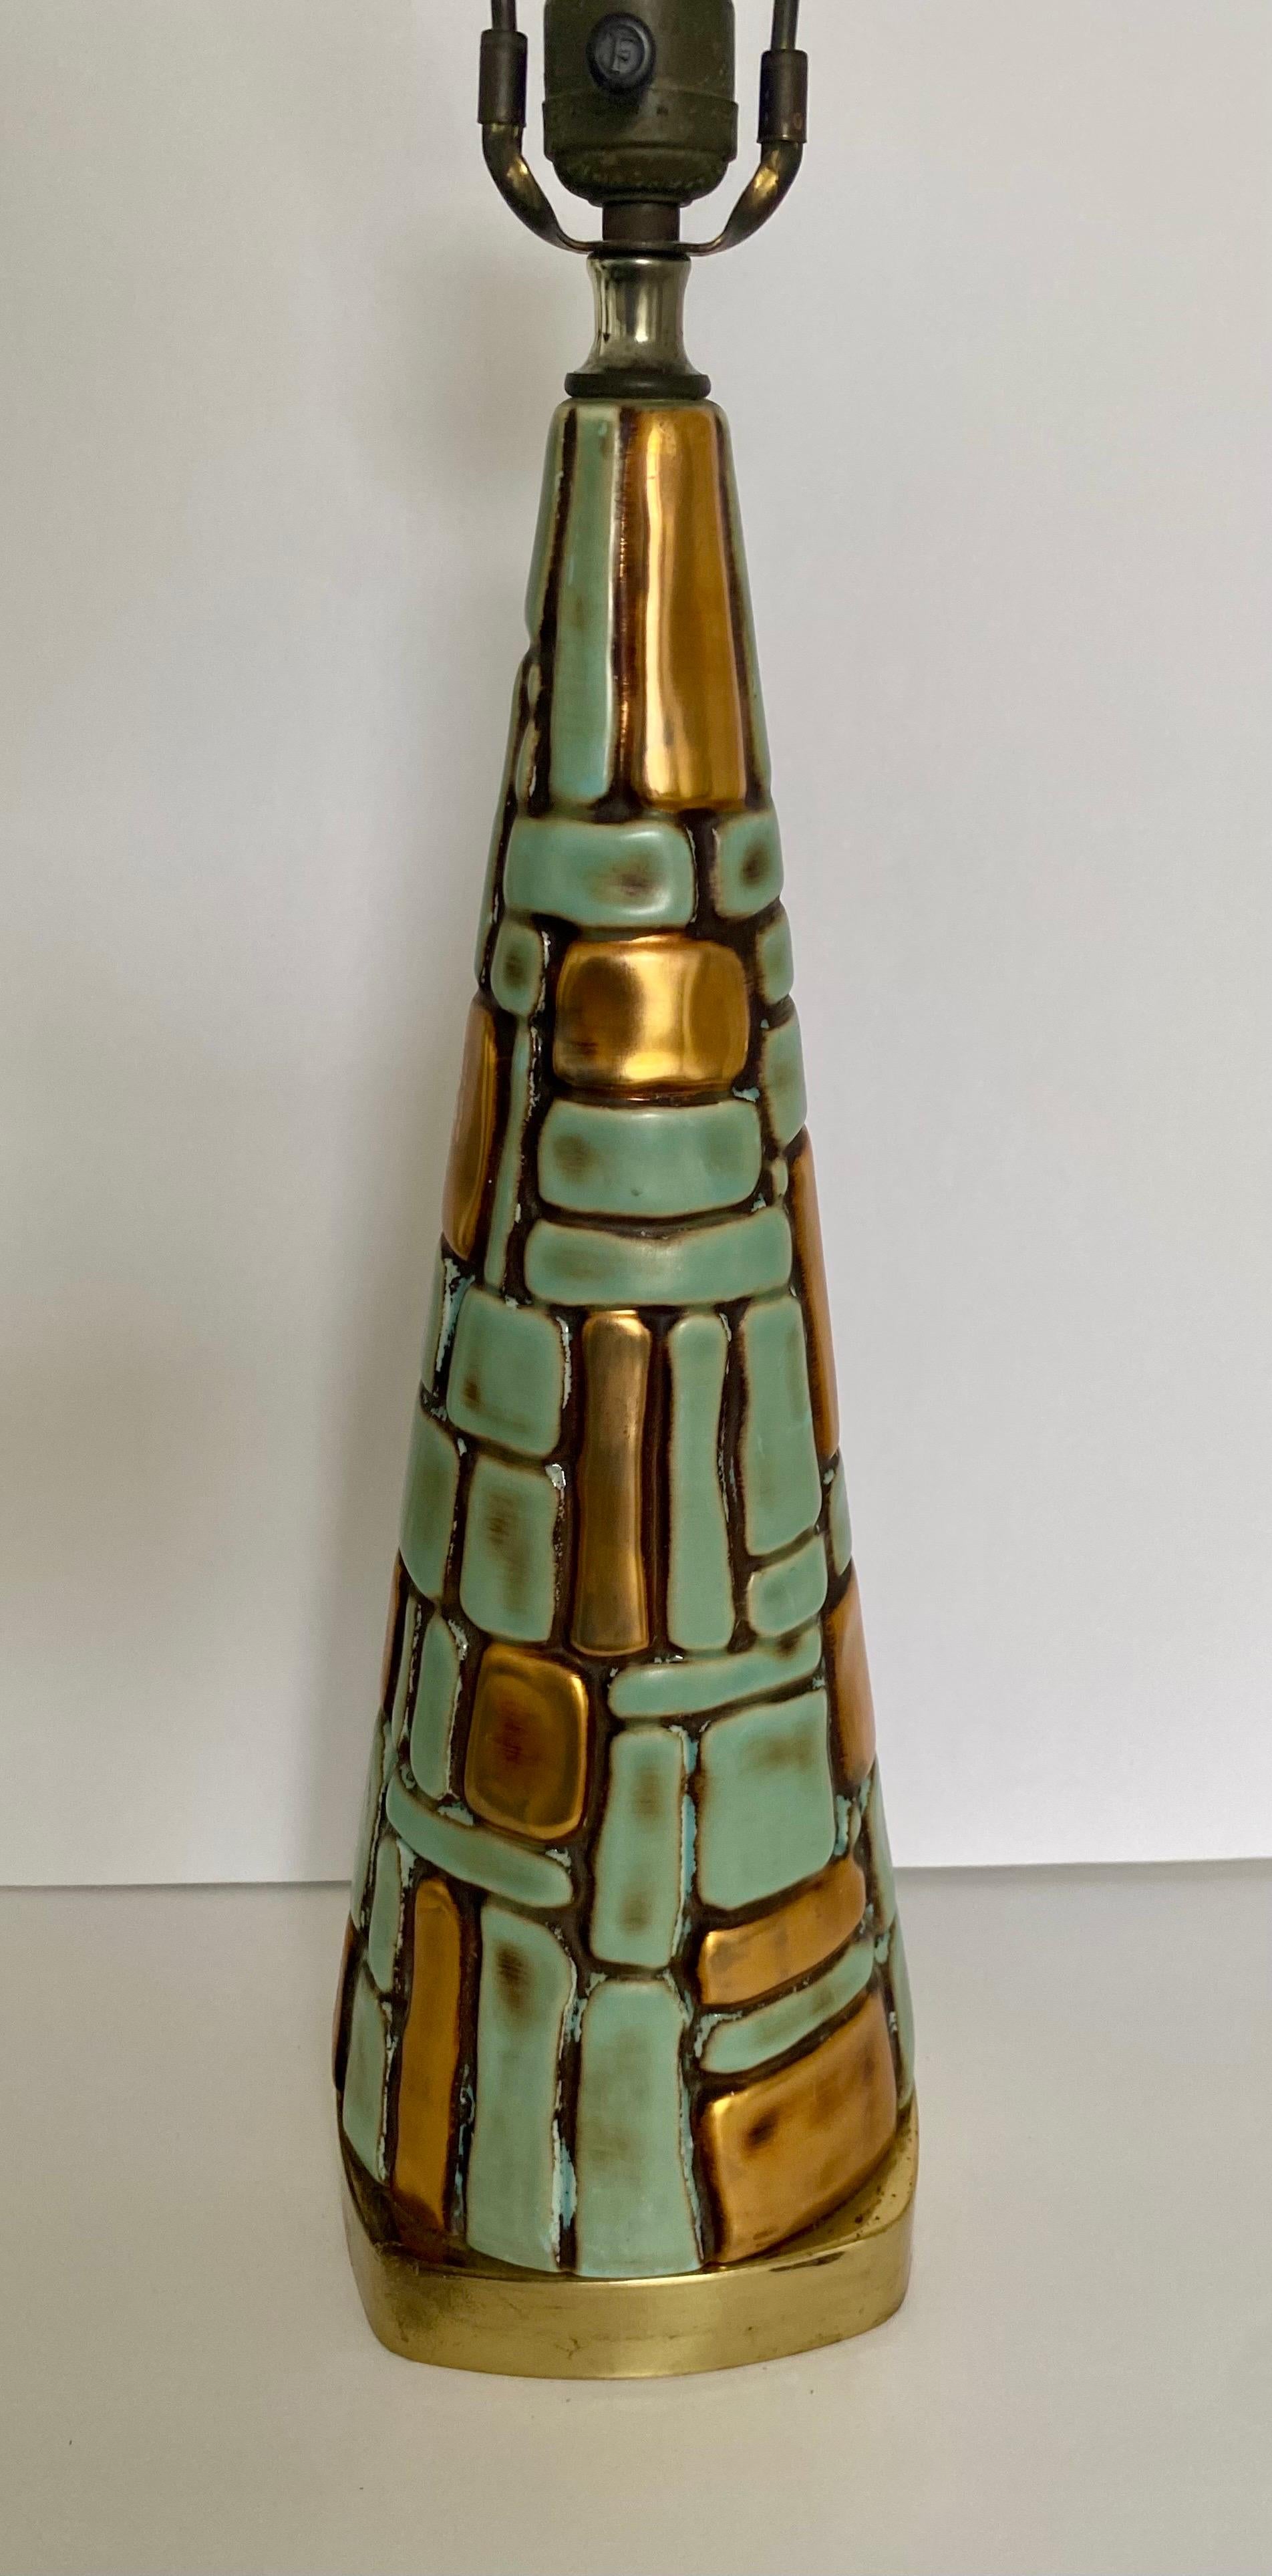 Fabulous Mid-Century Modern brutalist style table lamp. This sculptural pyramid form lamp features a textured stone-like raised mosaic design in vibrant turquoise and warm metallic gold painted tones. This eye-catching lamp is mounted on a square